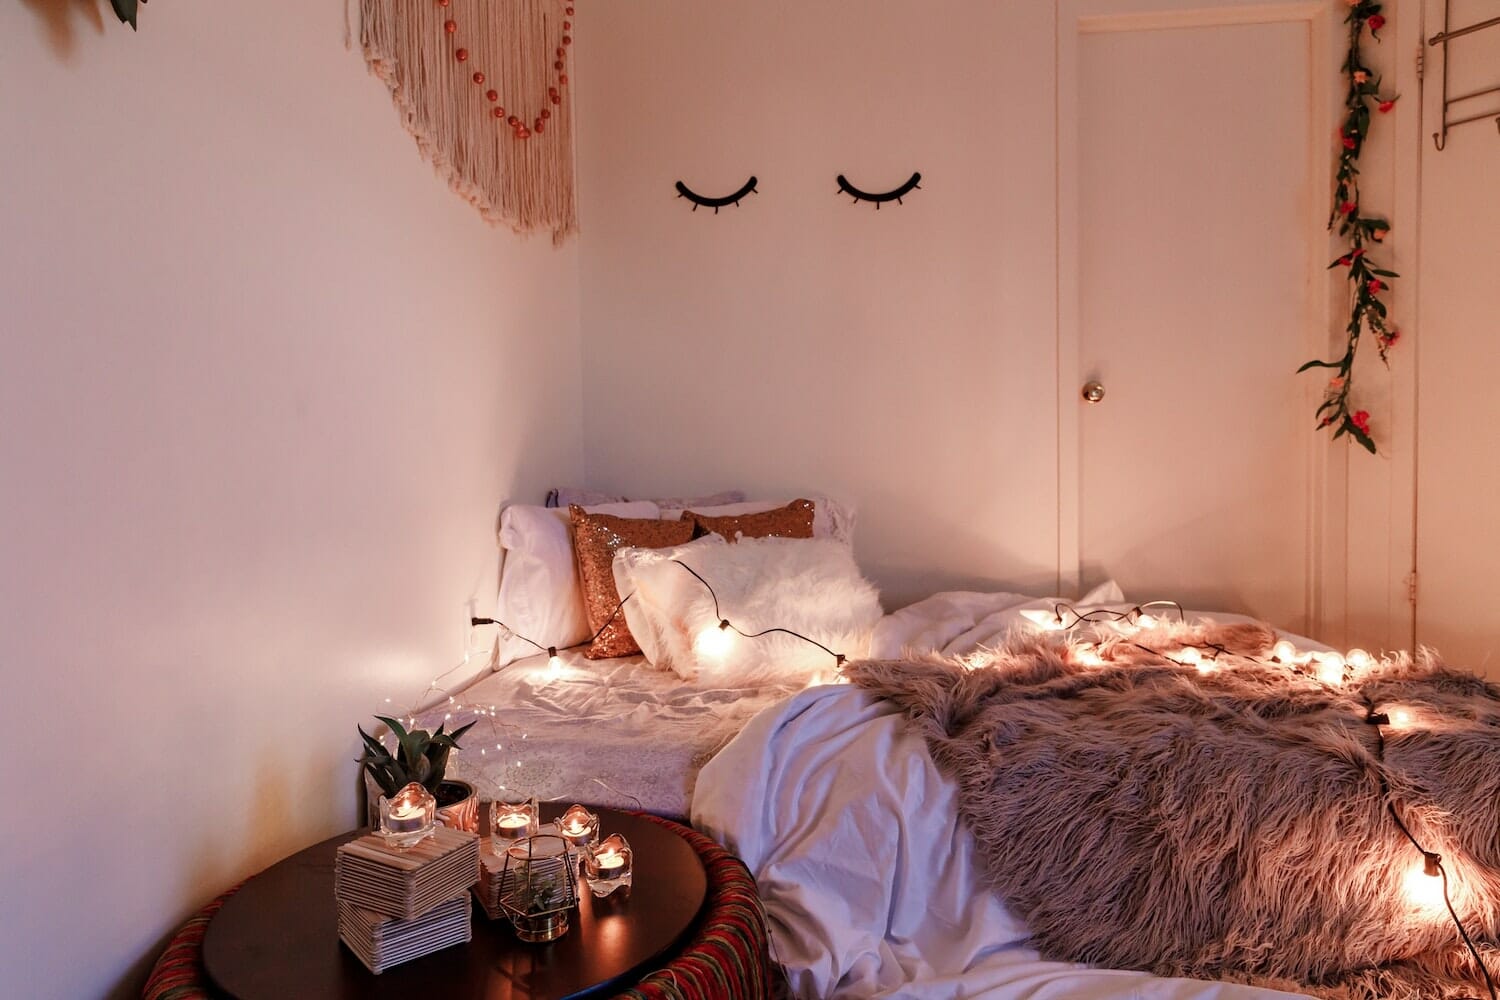 14 Fall Bedroom Ideas To Make It Cozy